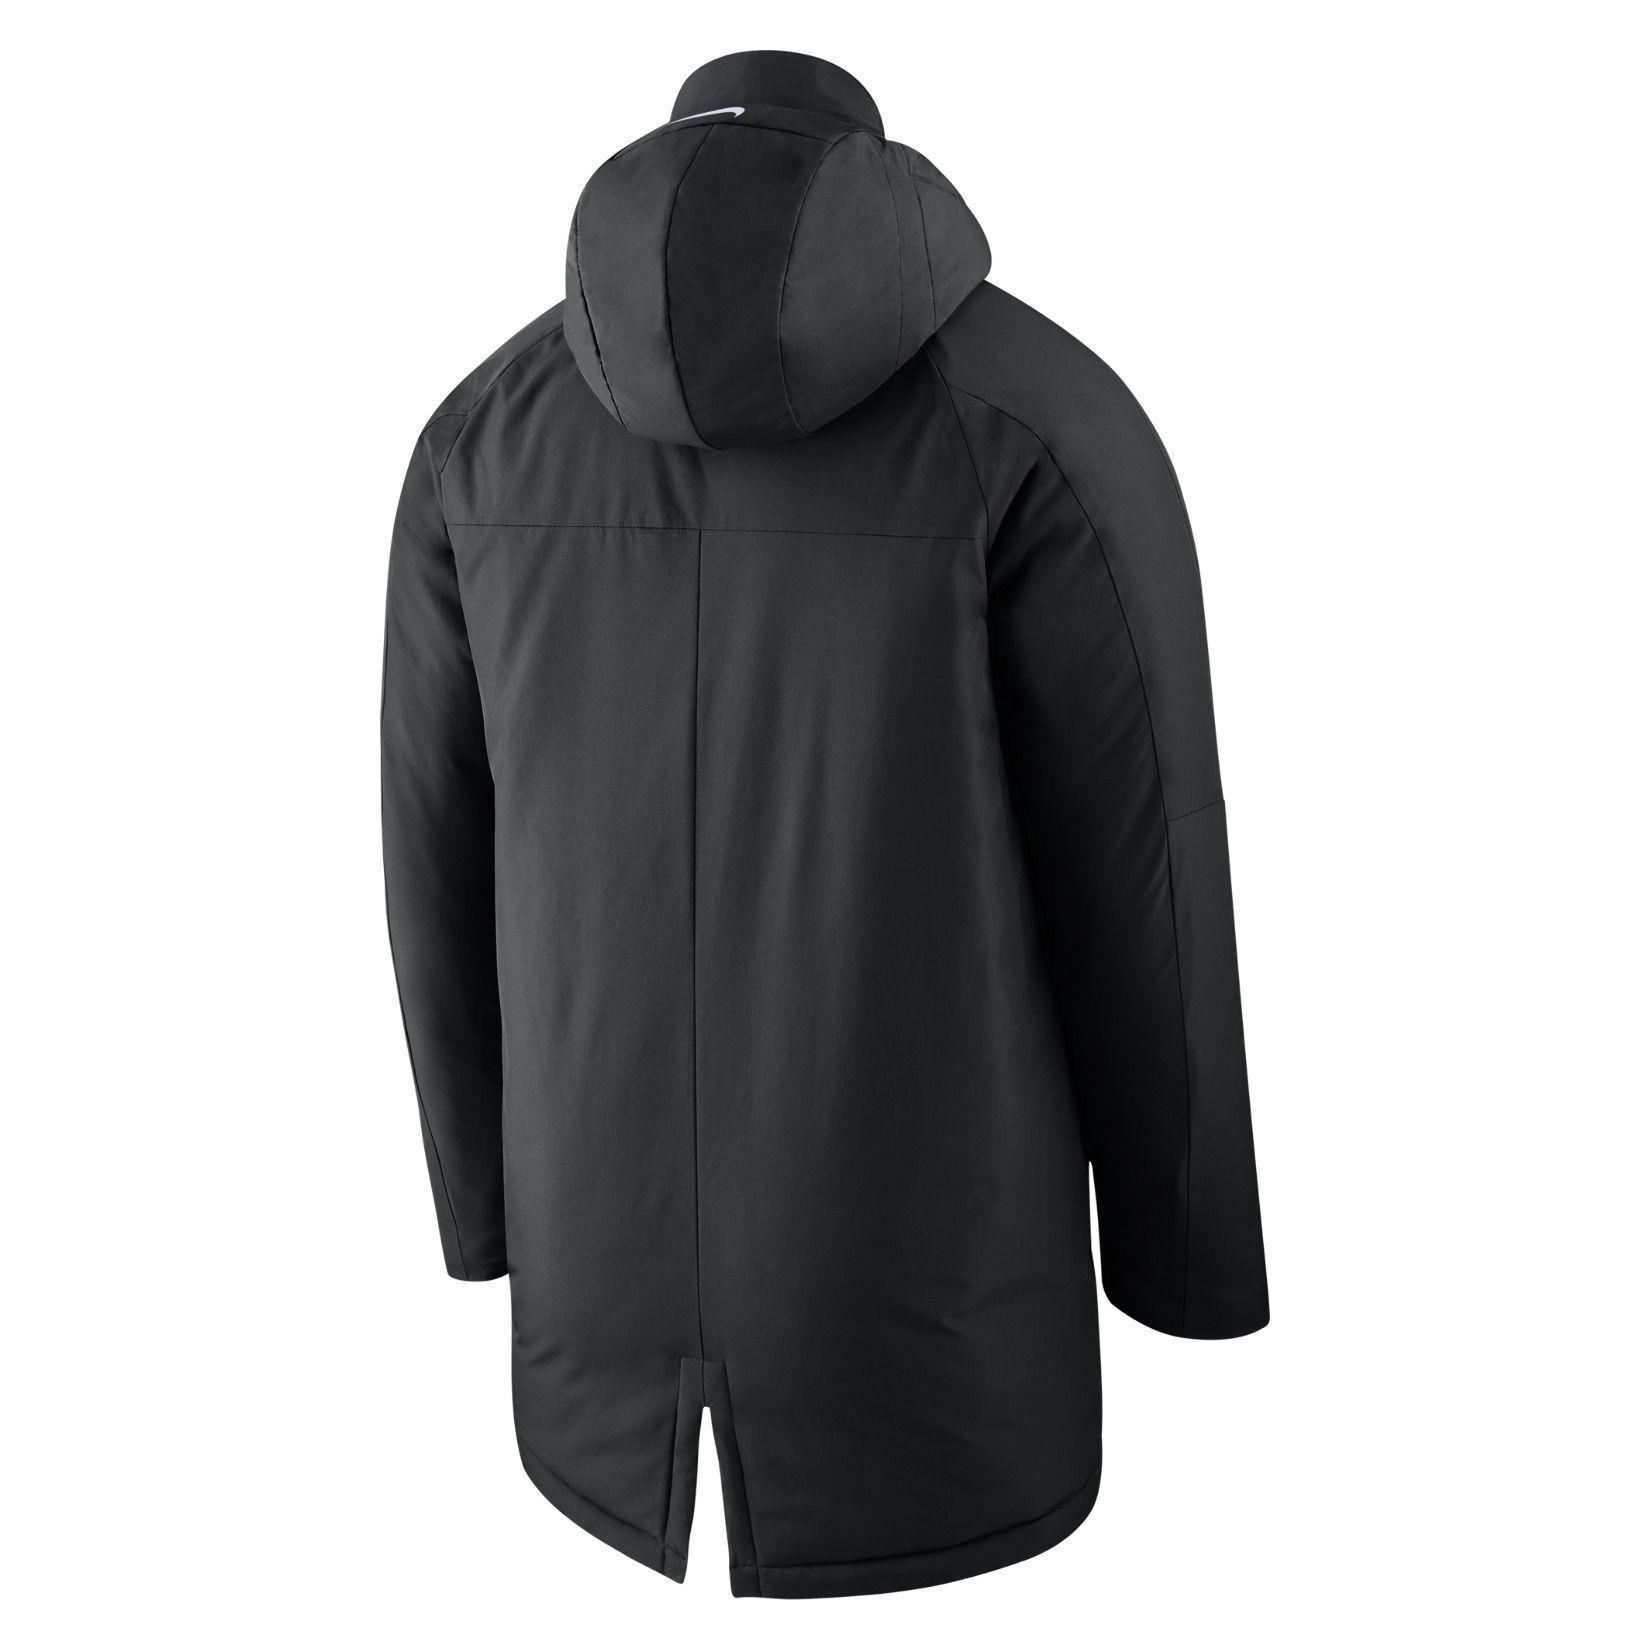 Nike Football Academy Parka Online Store, UP TO 60% OFF |  www.apmusicales.com